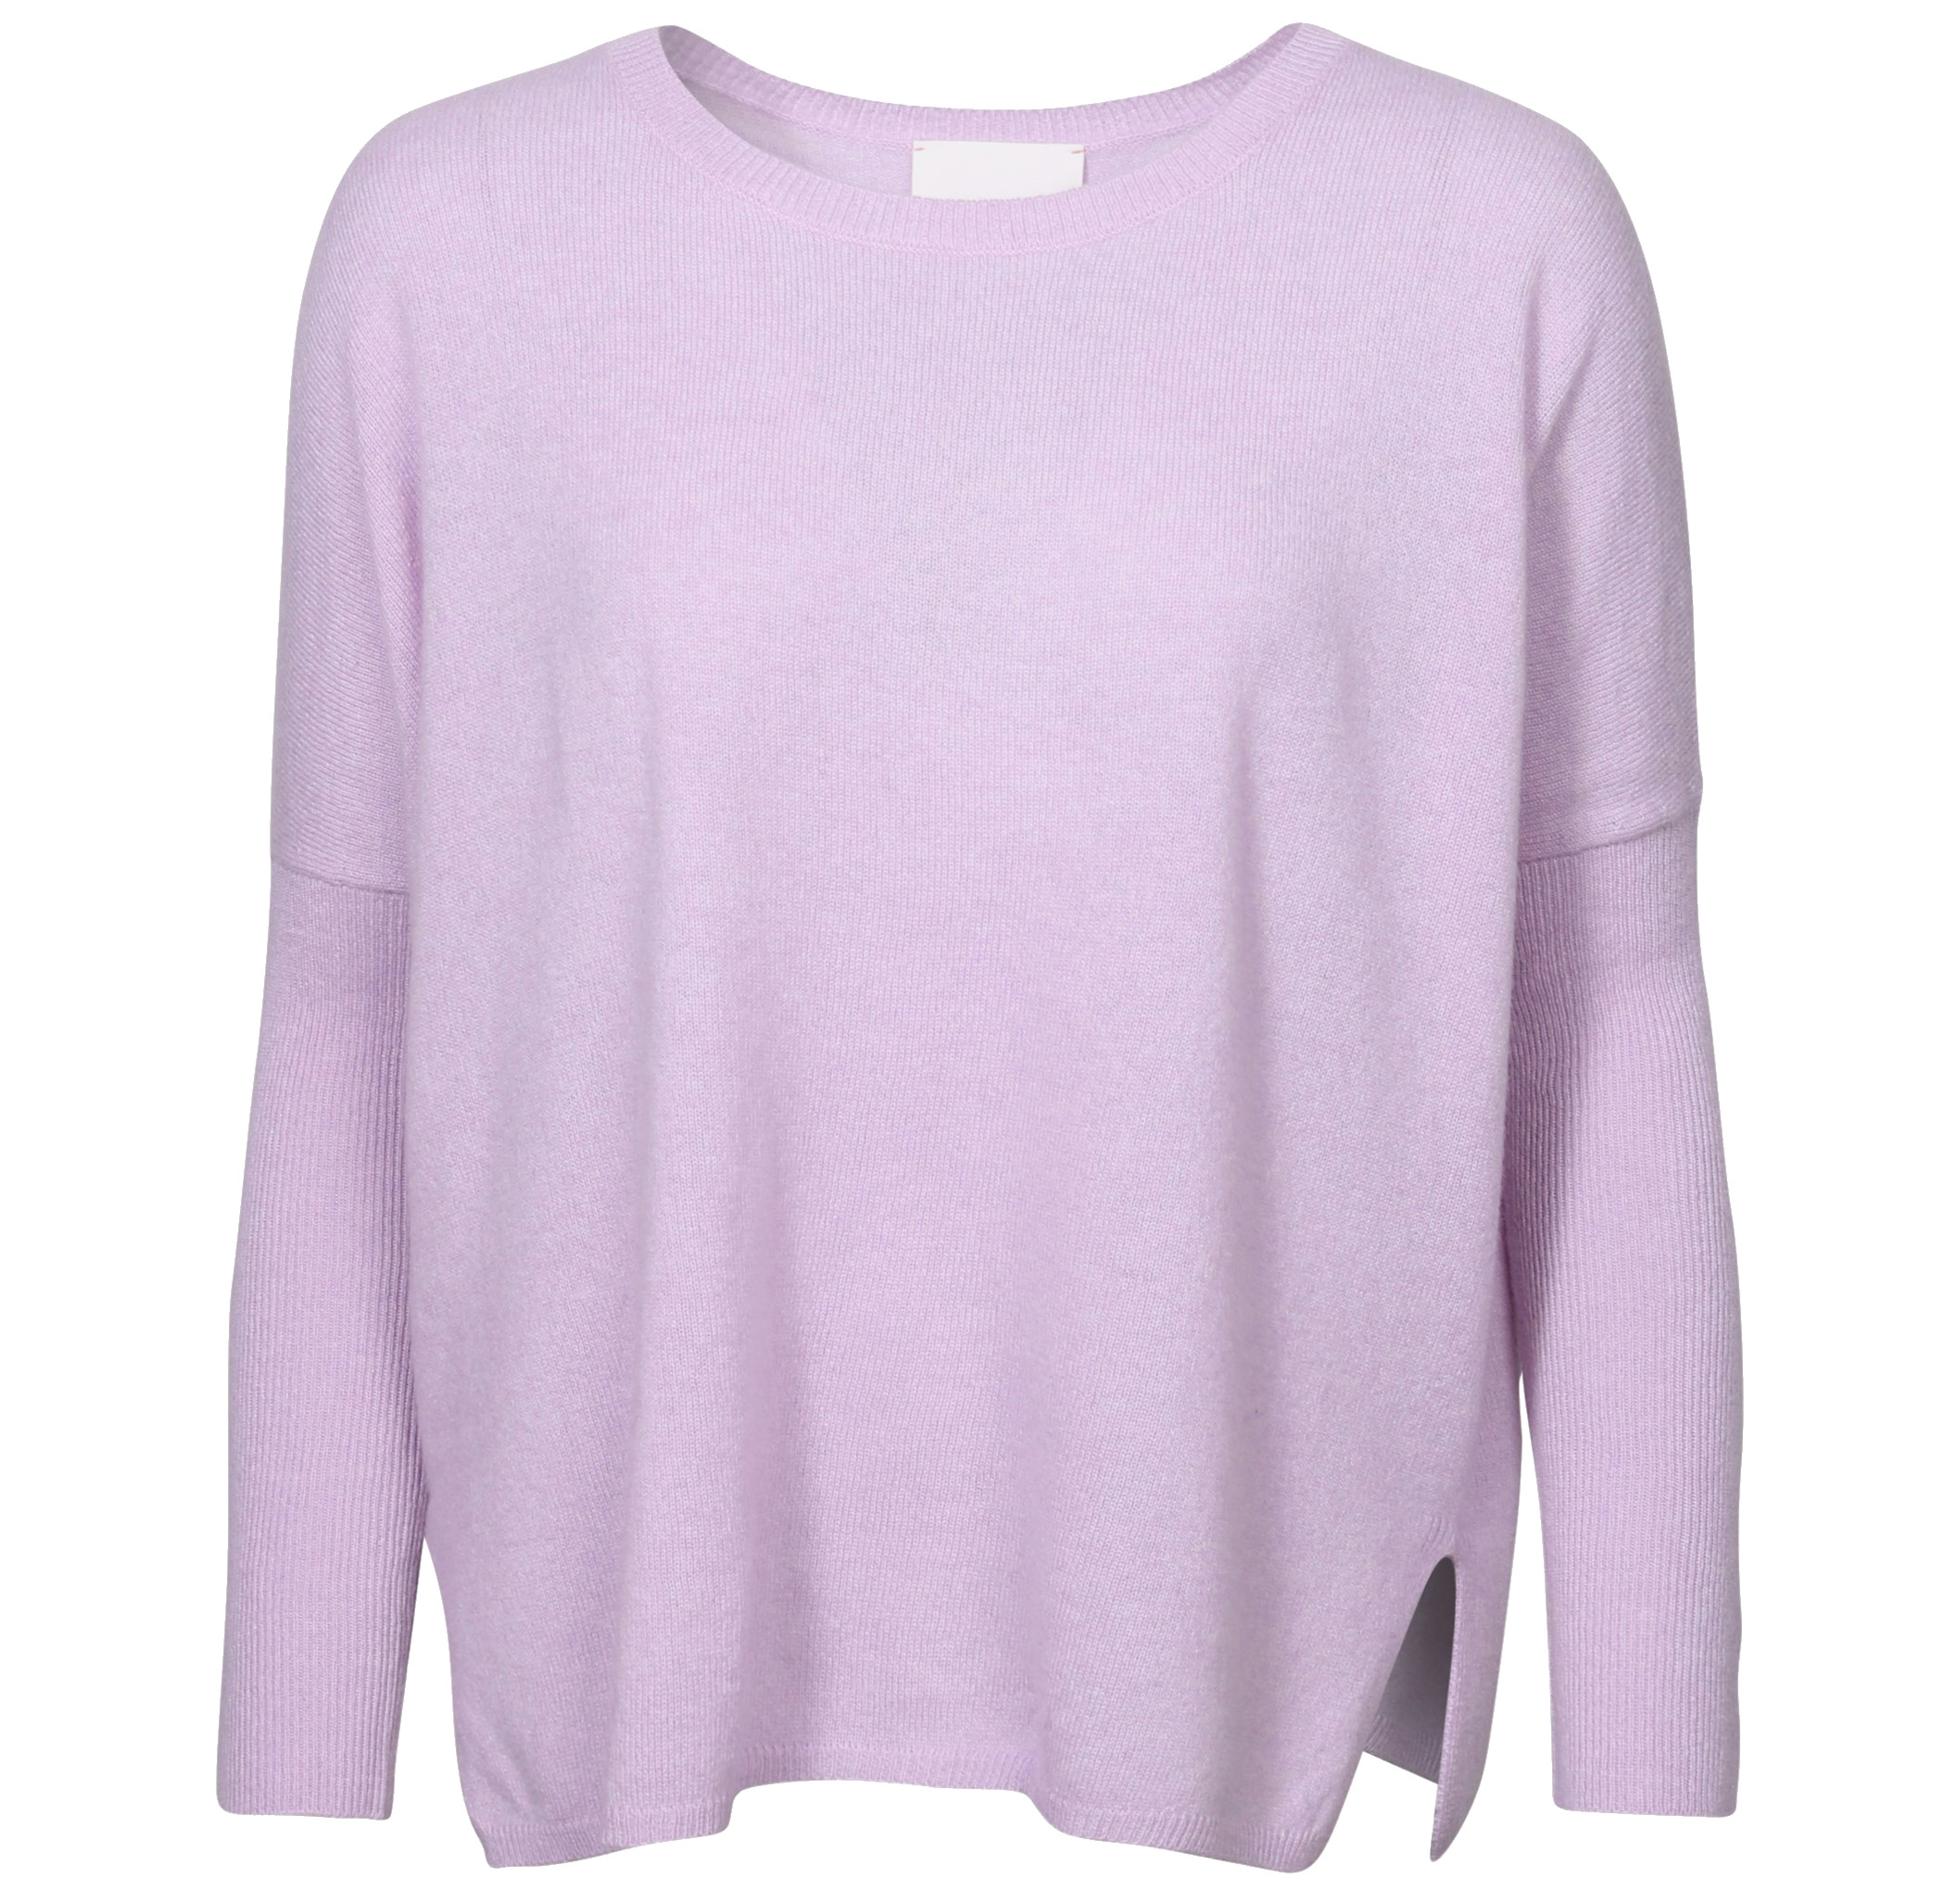 ABSOLUT CASHMERE Poncho Sweater Astrid in Light Lilac S